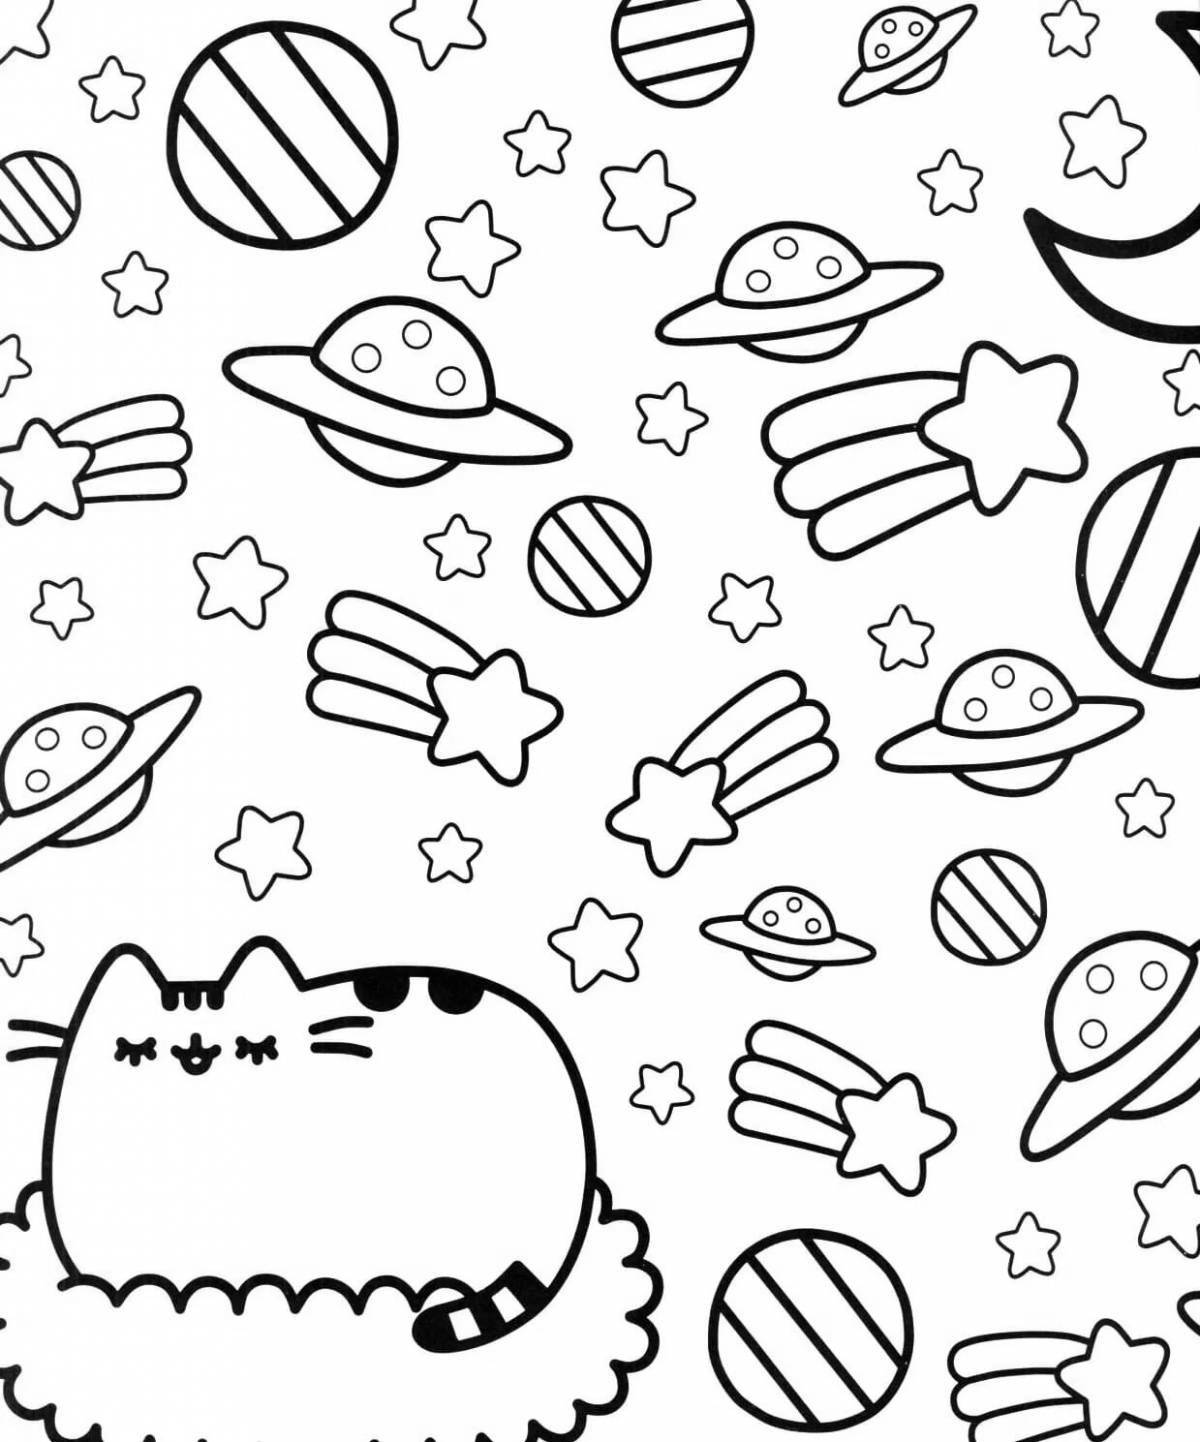 Pusheen relaxed coloring page